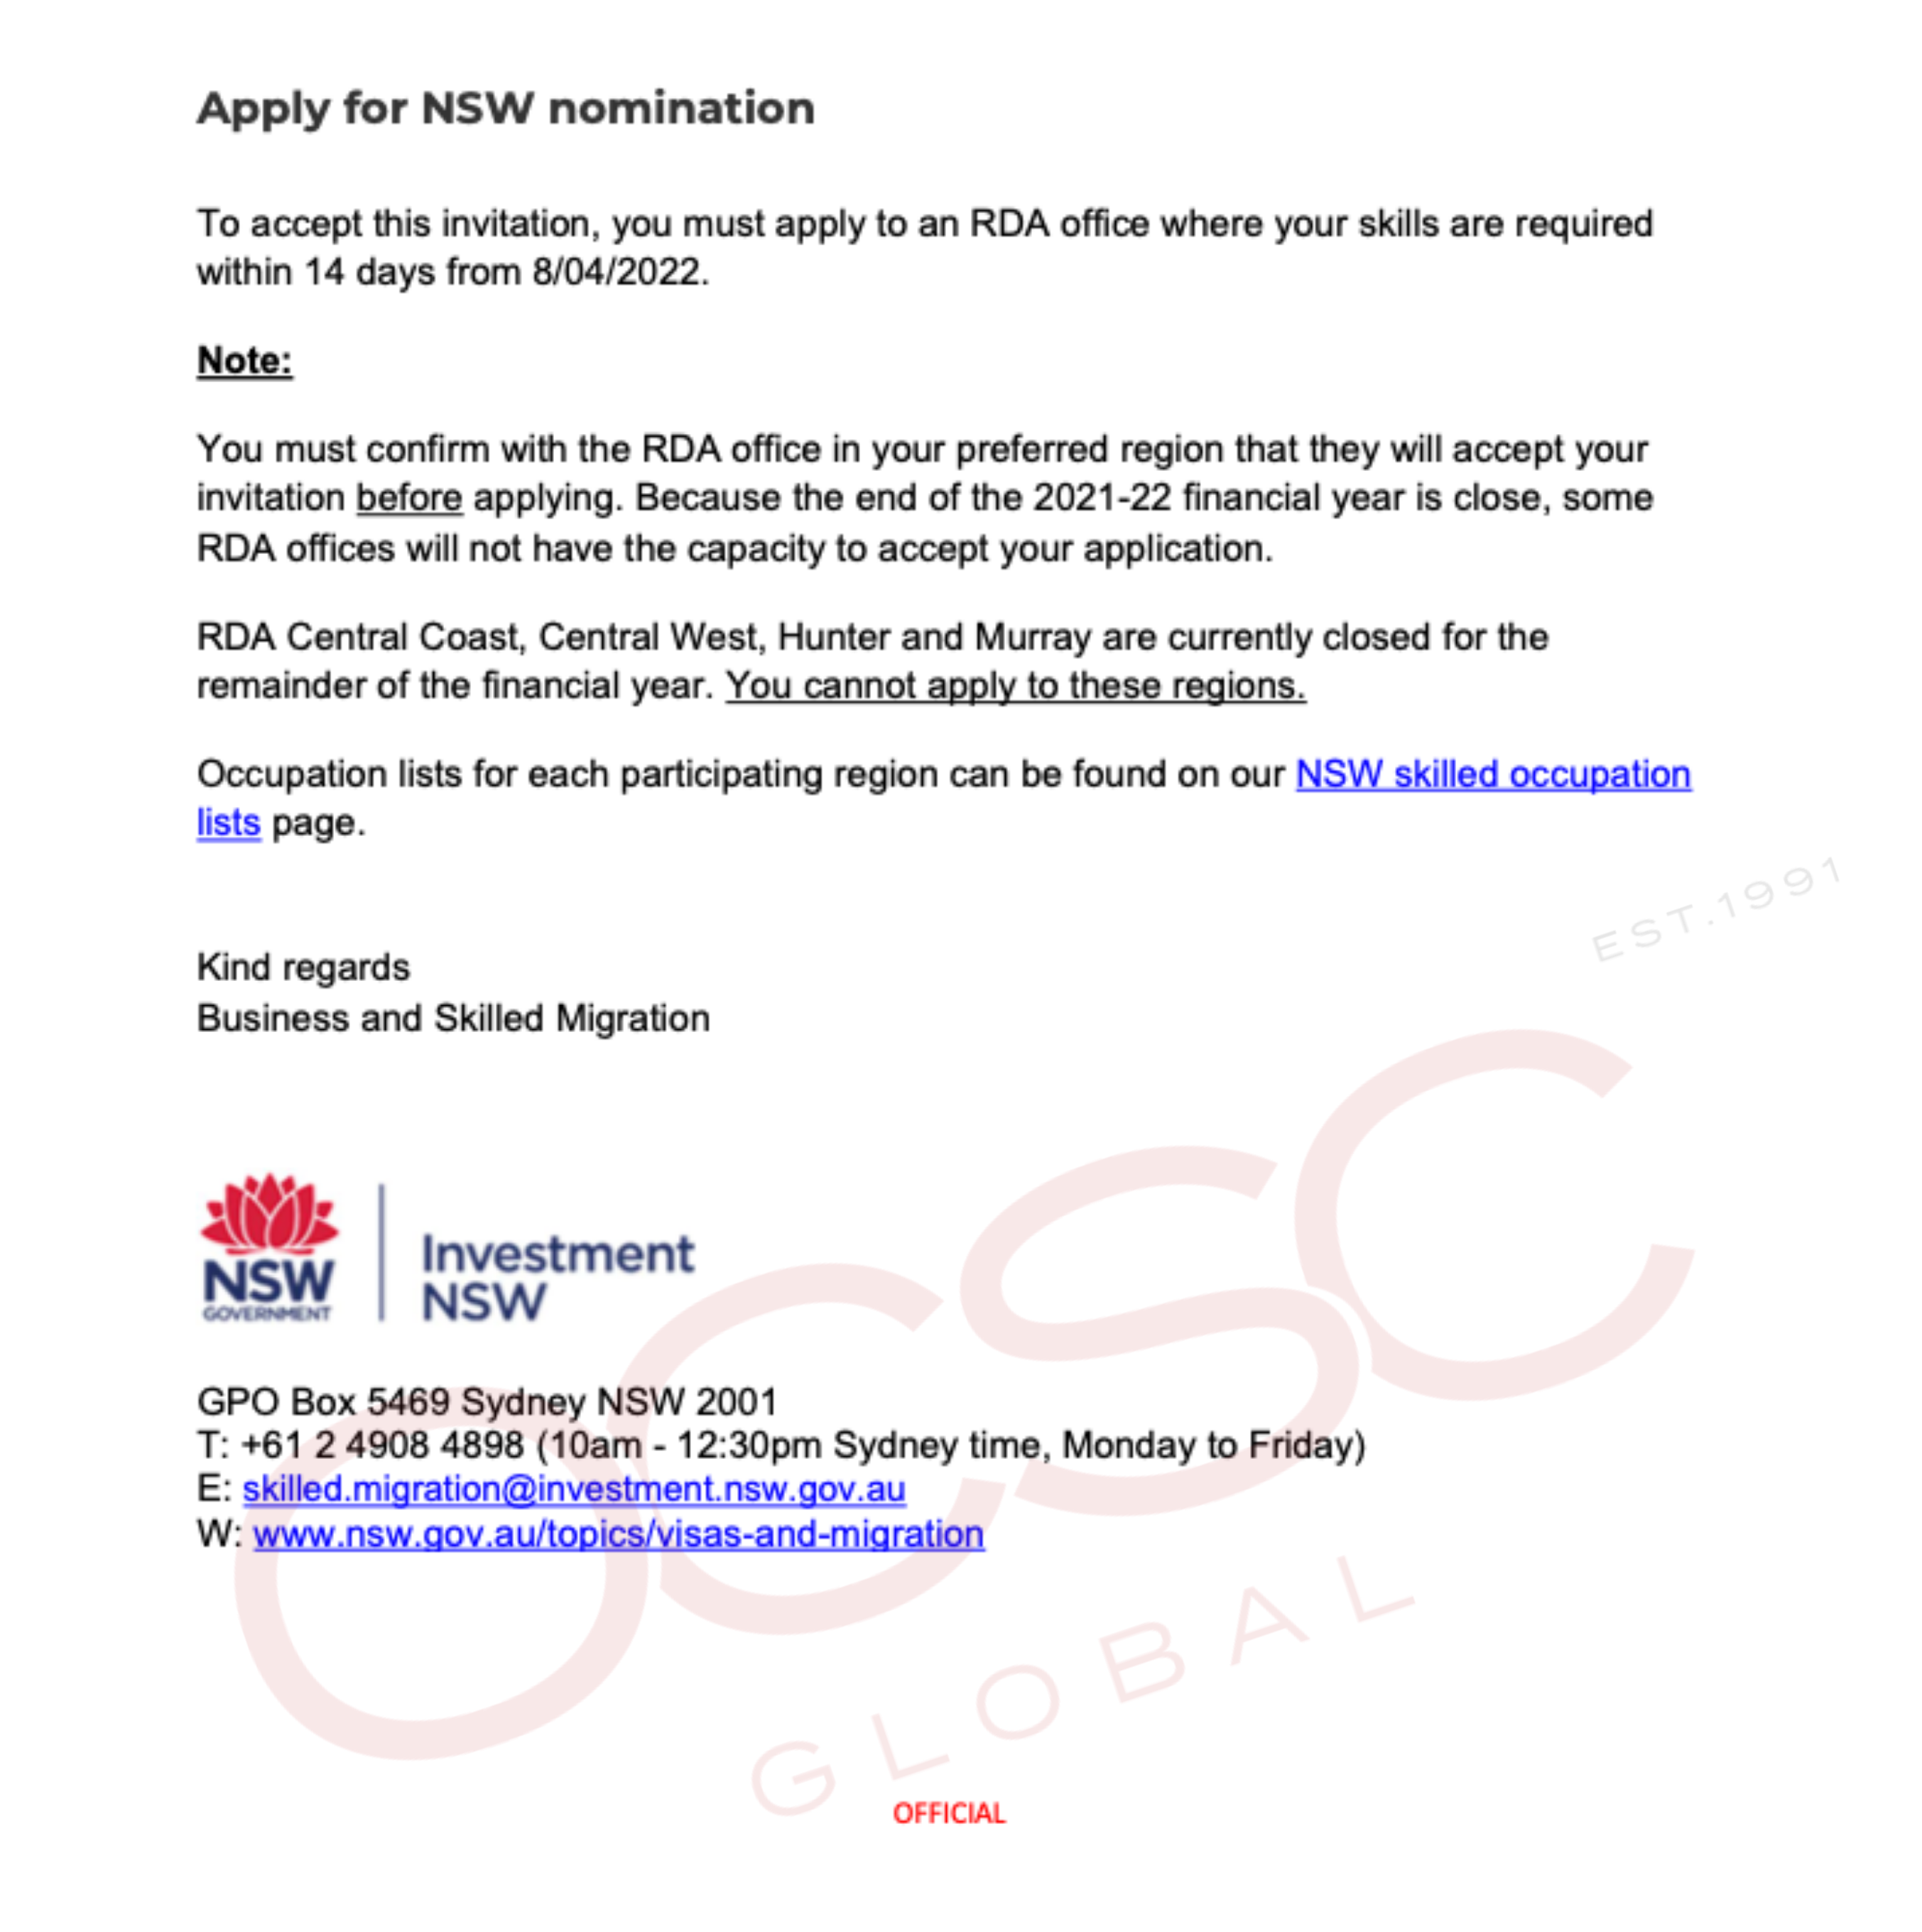 Invitation to Apply for NSW Nomination Subclass 491 OCSC Global